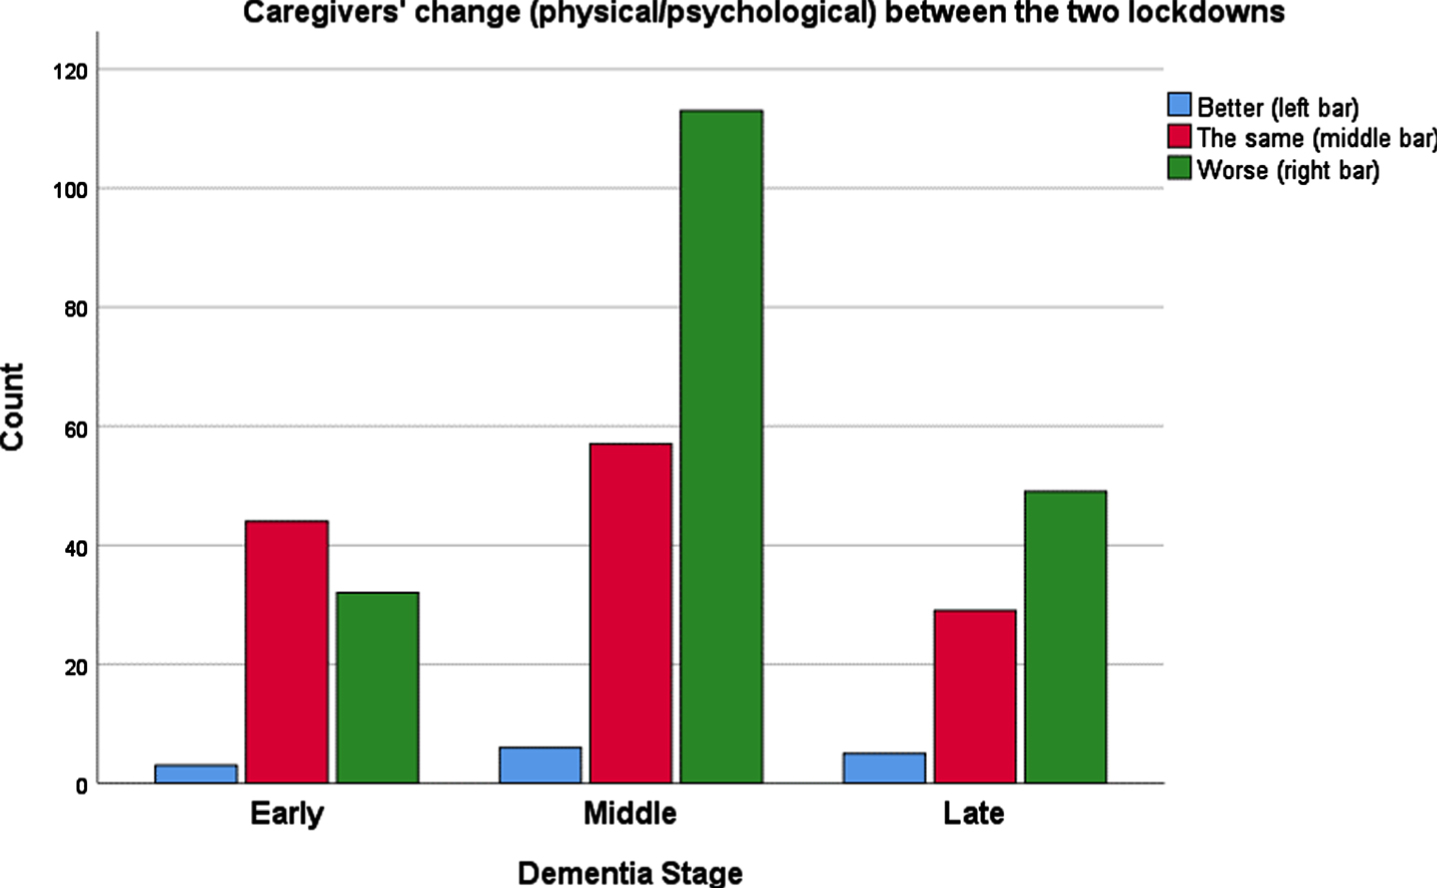 Caregiver’s change (physical/psychological) between the two lockdowns because of the COVID-19 pandemic, by dementia stage of the person they take care of.